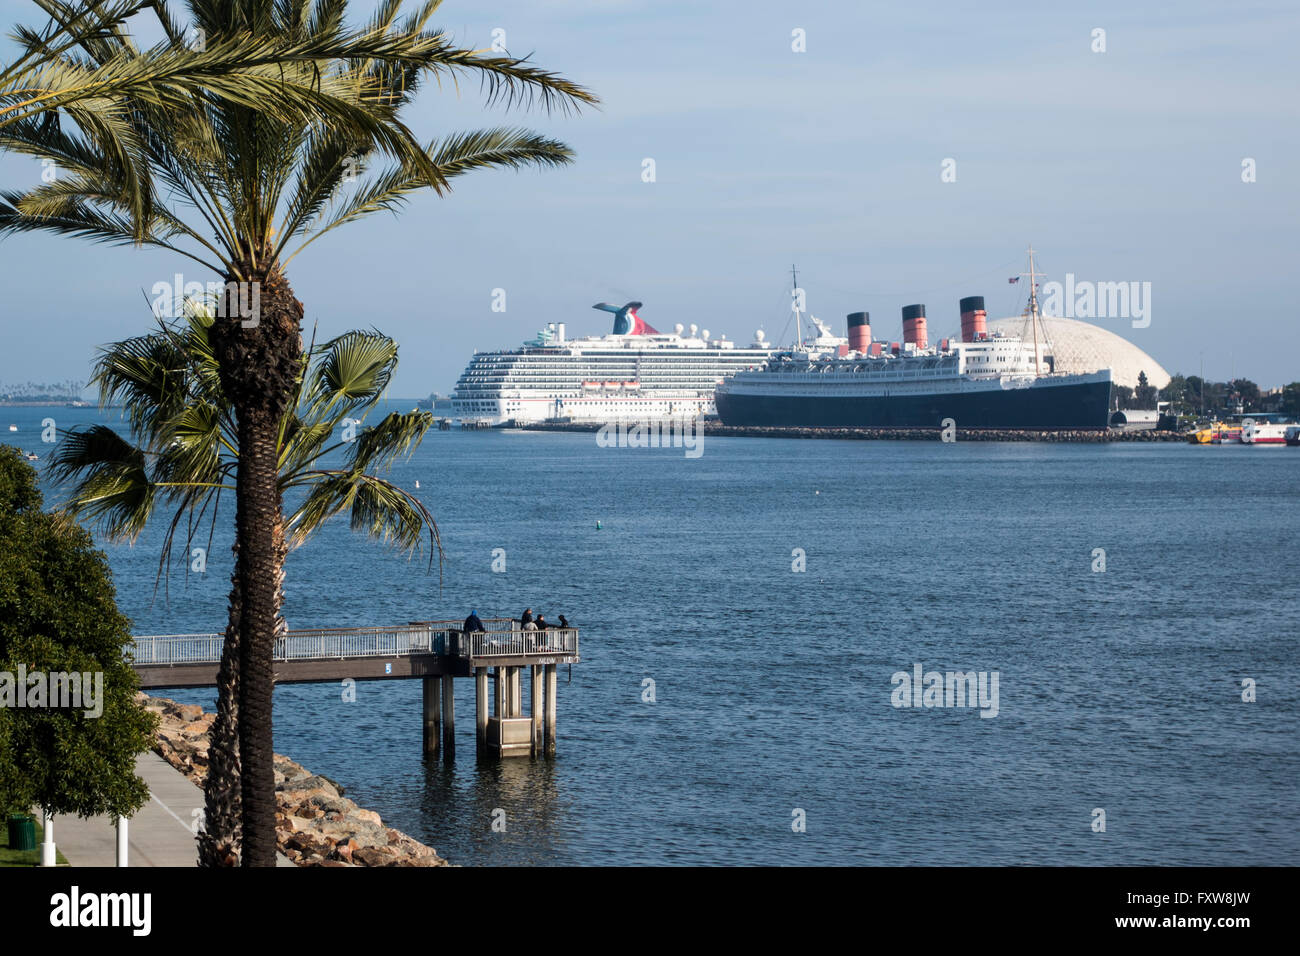 The Queen Mary berthed at Longbeach California with carnival cruiseliner in the background, palm tree in the foreground Stock Photo